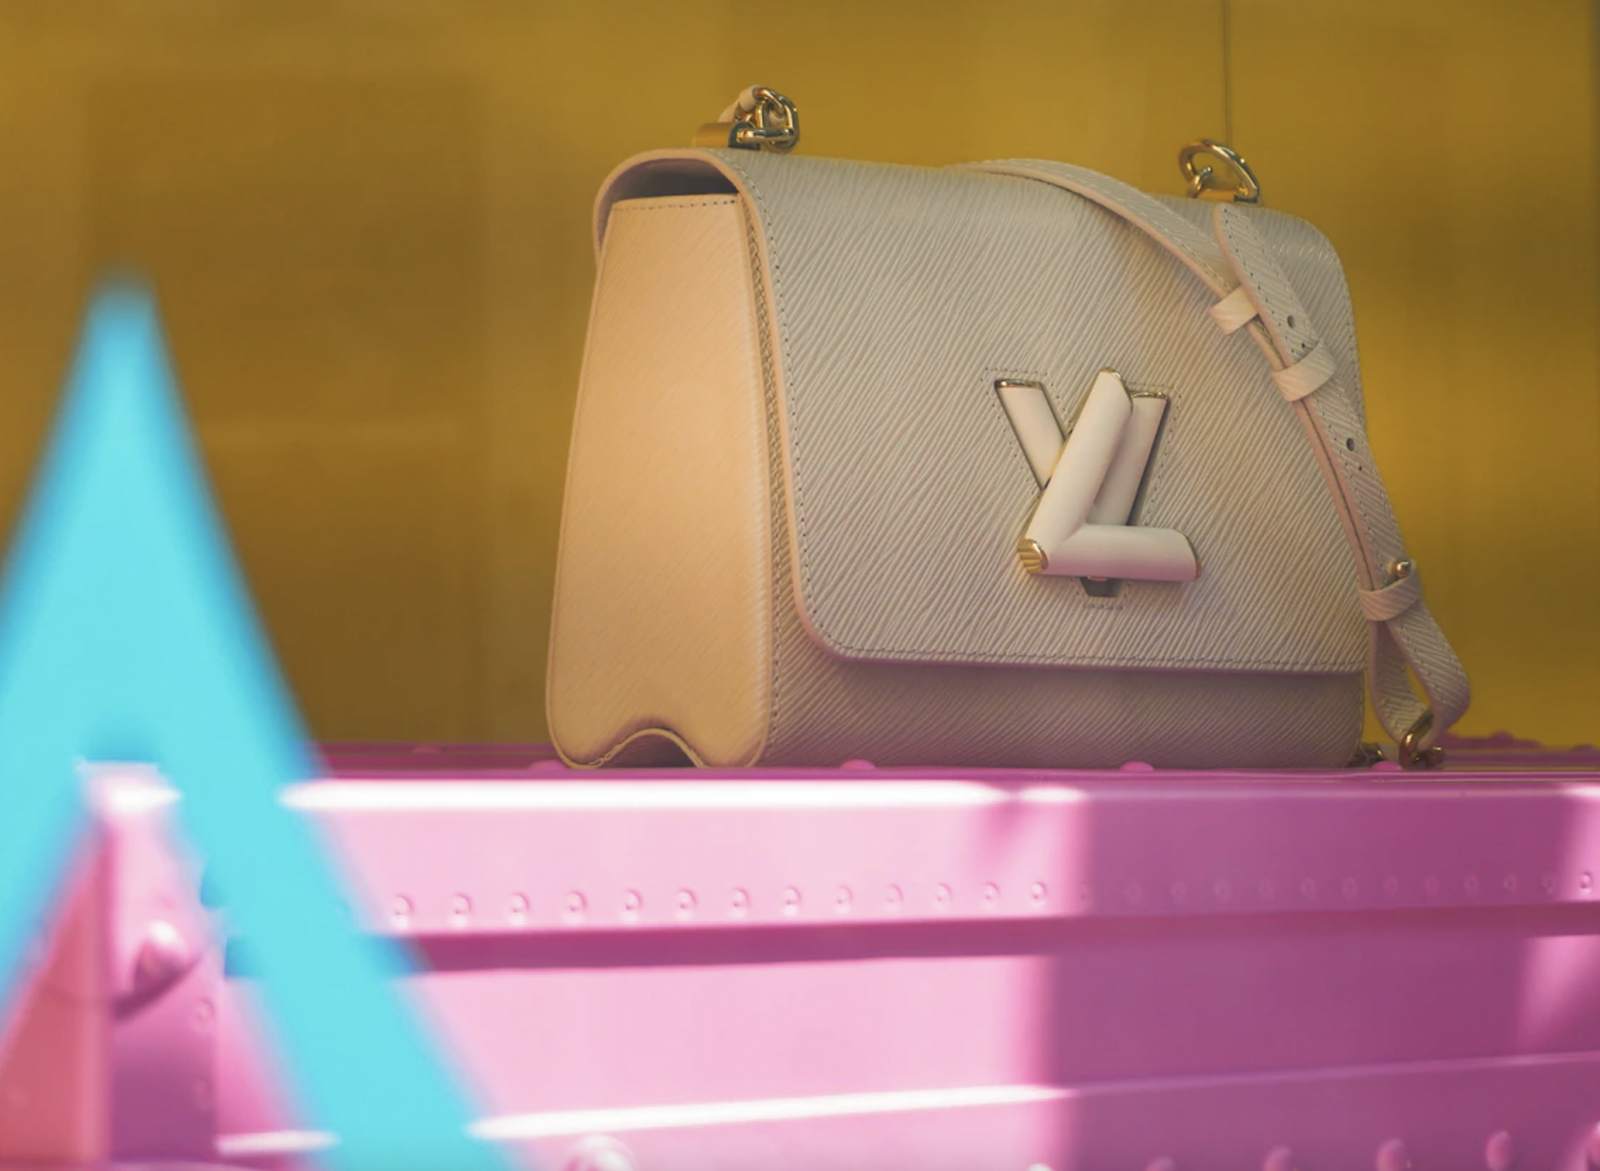 A Louis Vuitton Employee is at the Center of $15 Million-Plus